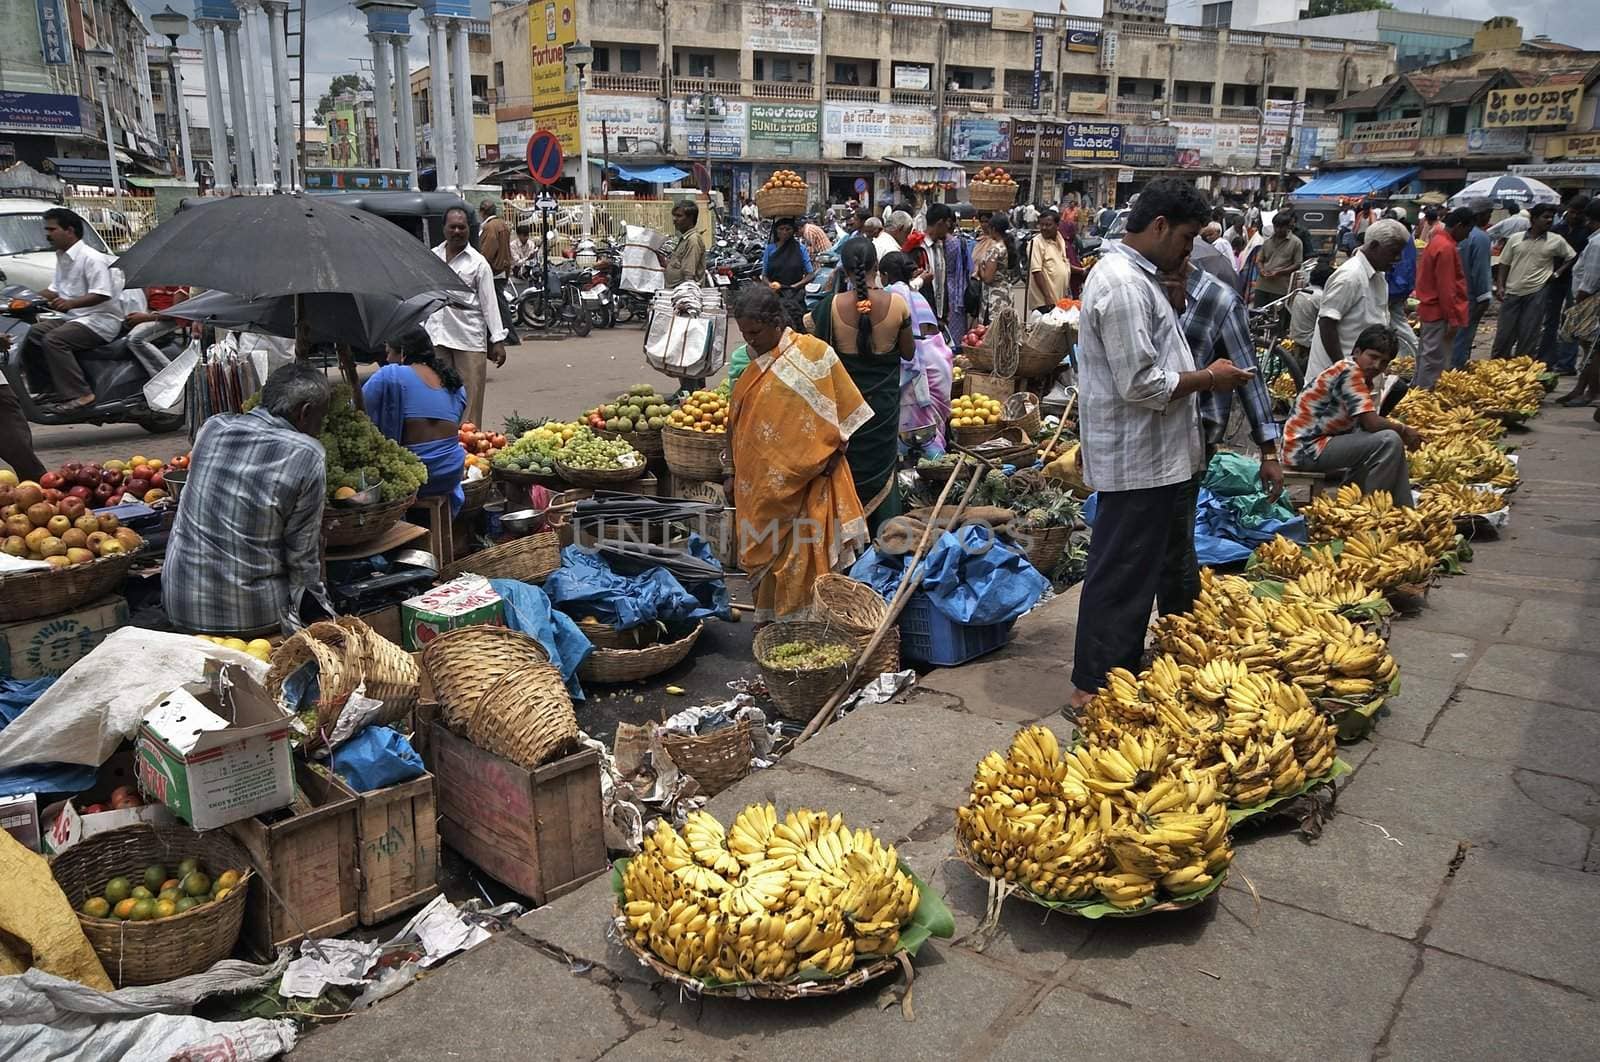 Bananas for sale in the market, Mysore, India